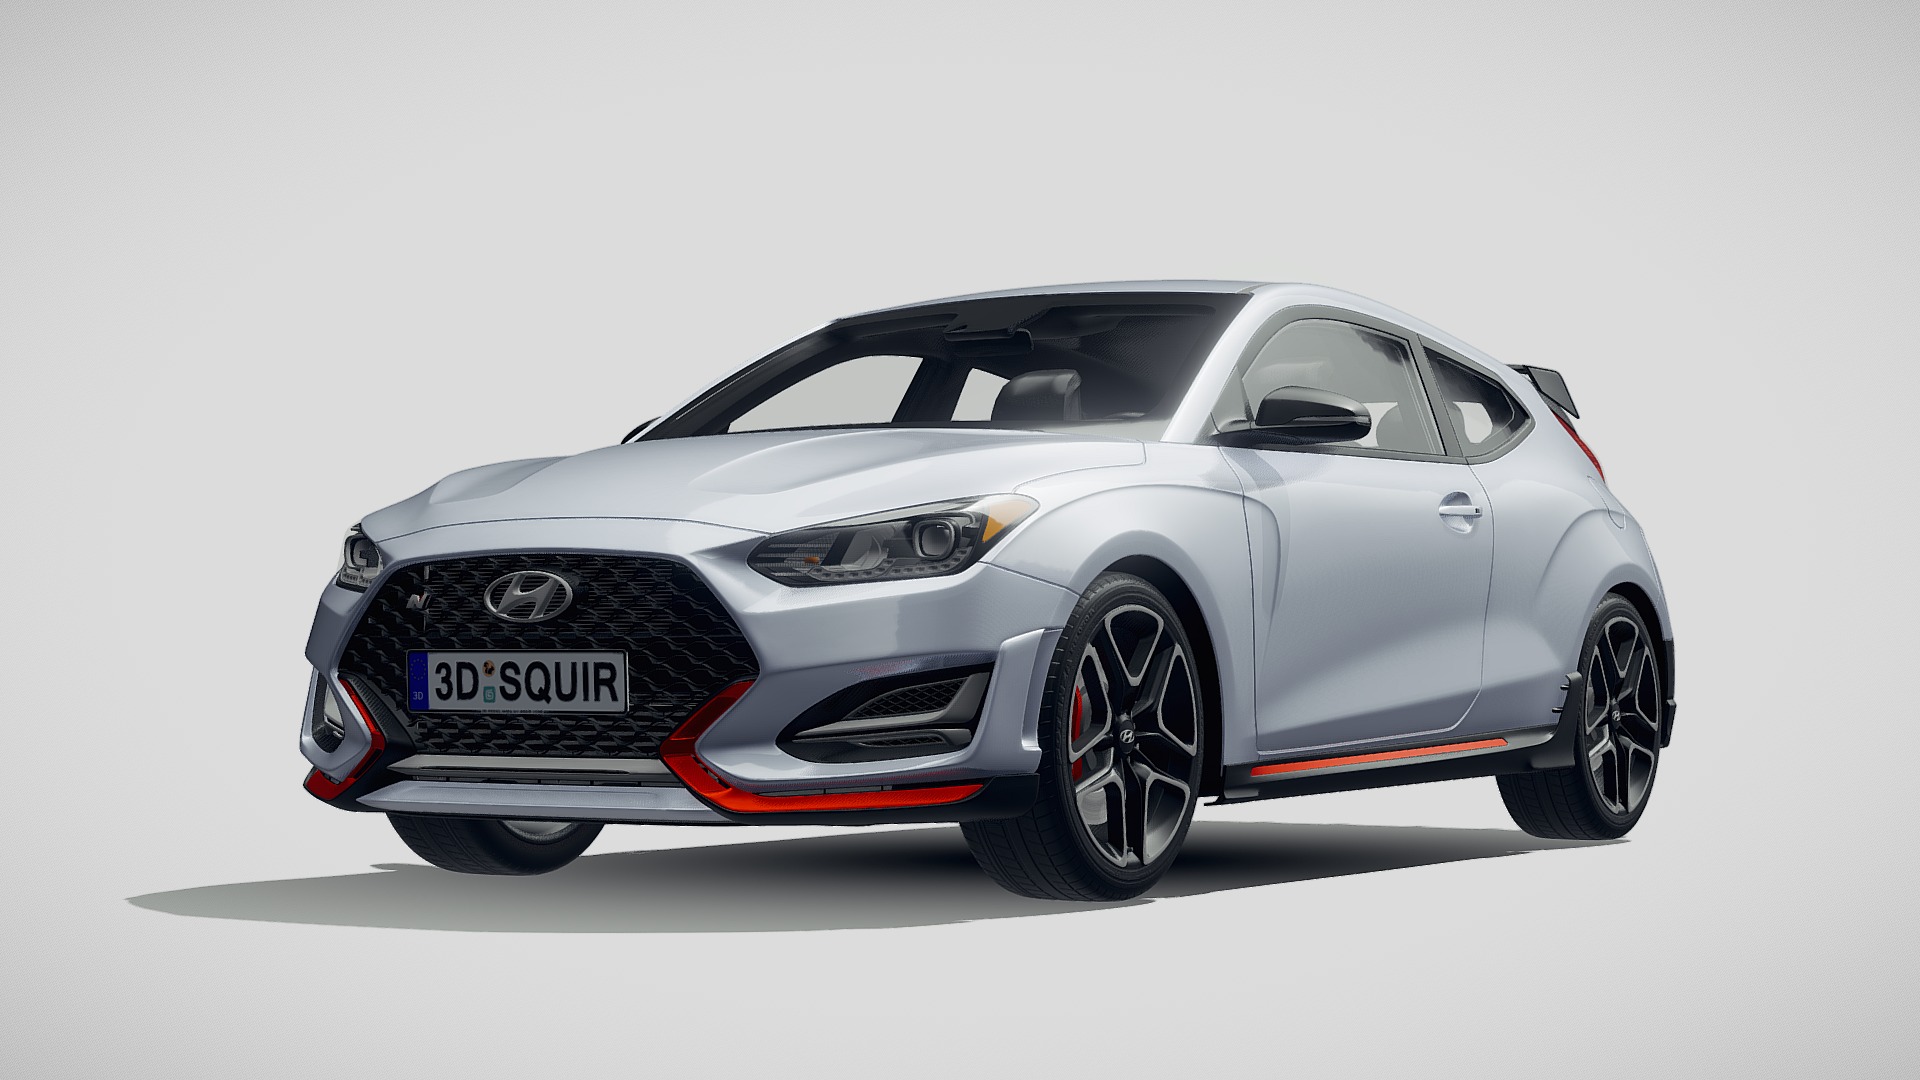 3D model Hyundai Veloster N 2019 - This is a 3D model of the Hyundai Veloster N 2019. The 3D model is about a silver sports car.